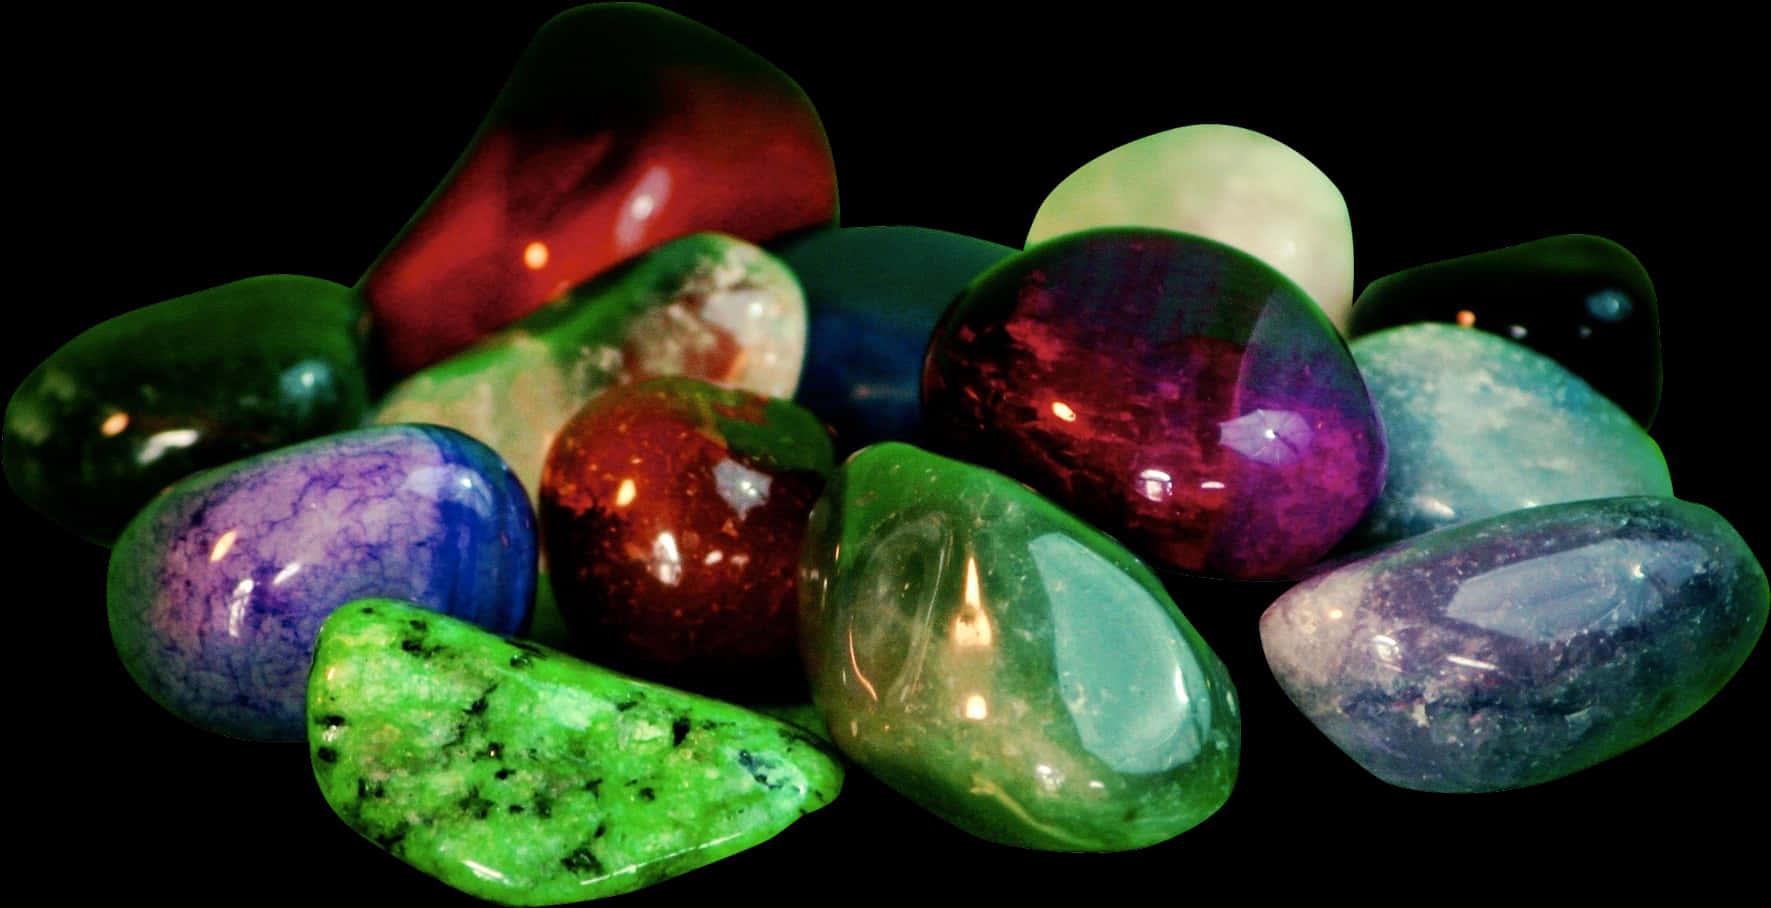 A Group Of Colorful Rocks